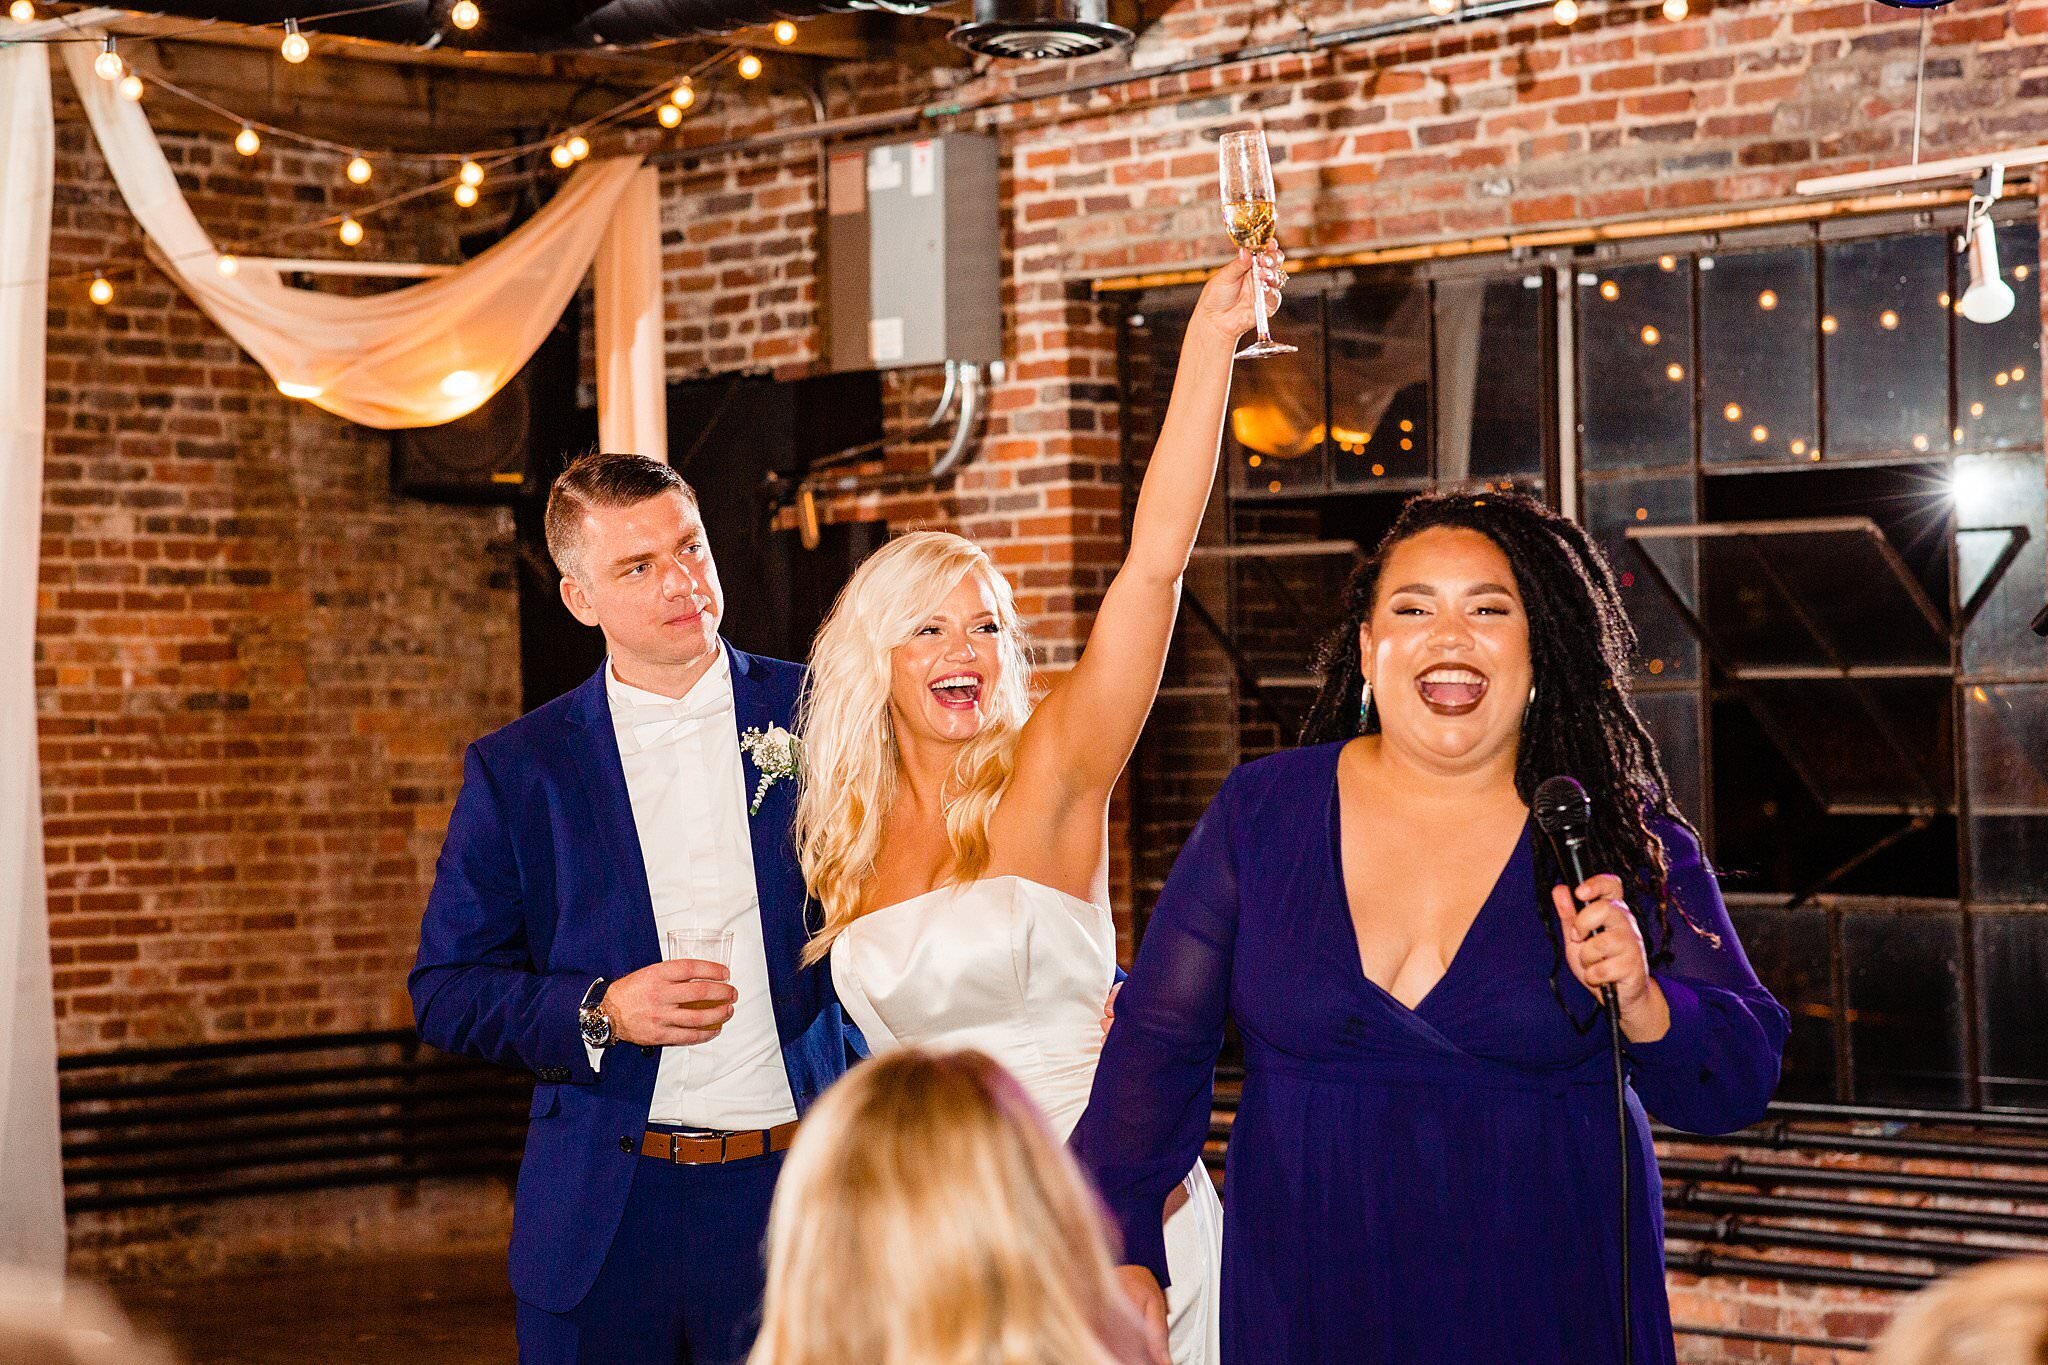 Bride raising a champagne flute as maid of honor toasts the happy couple